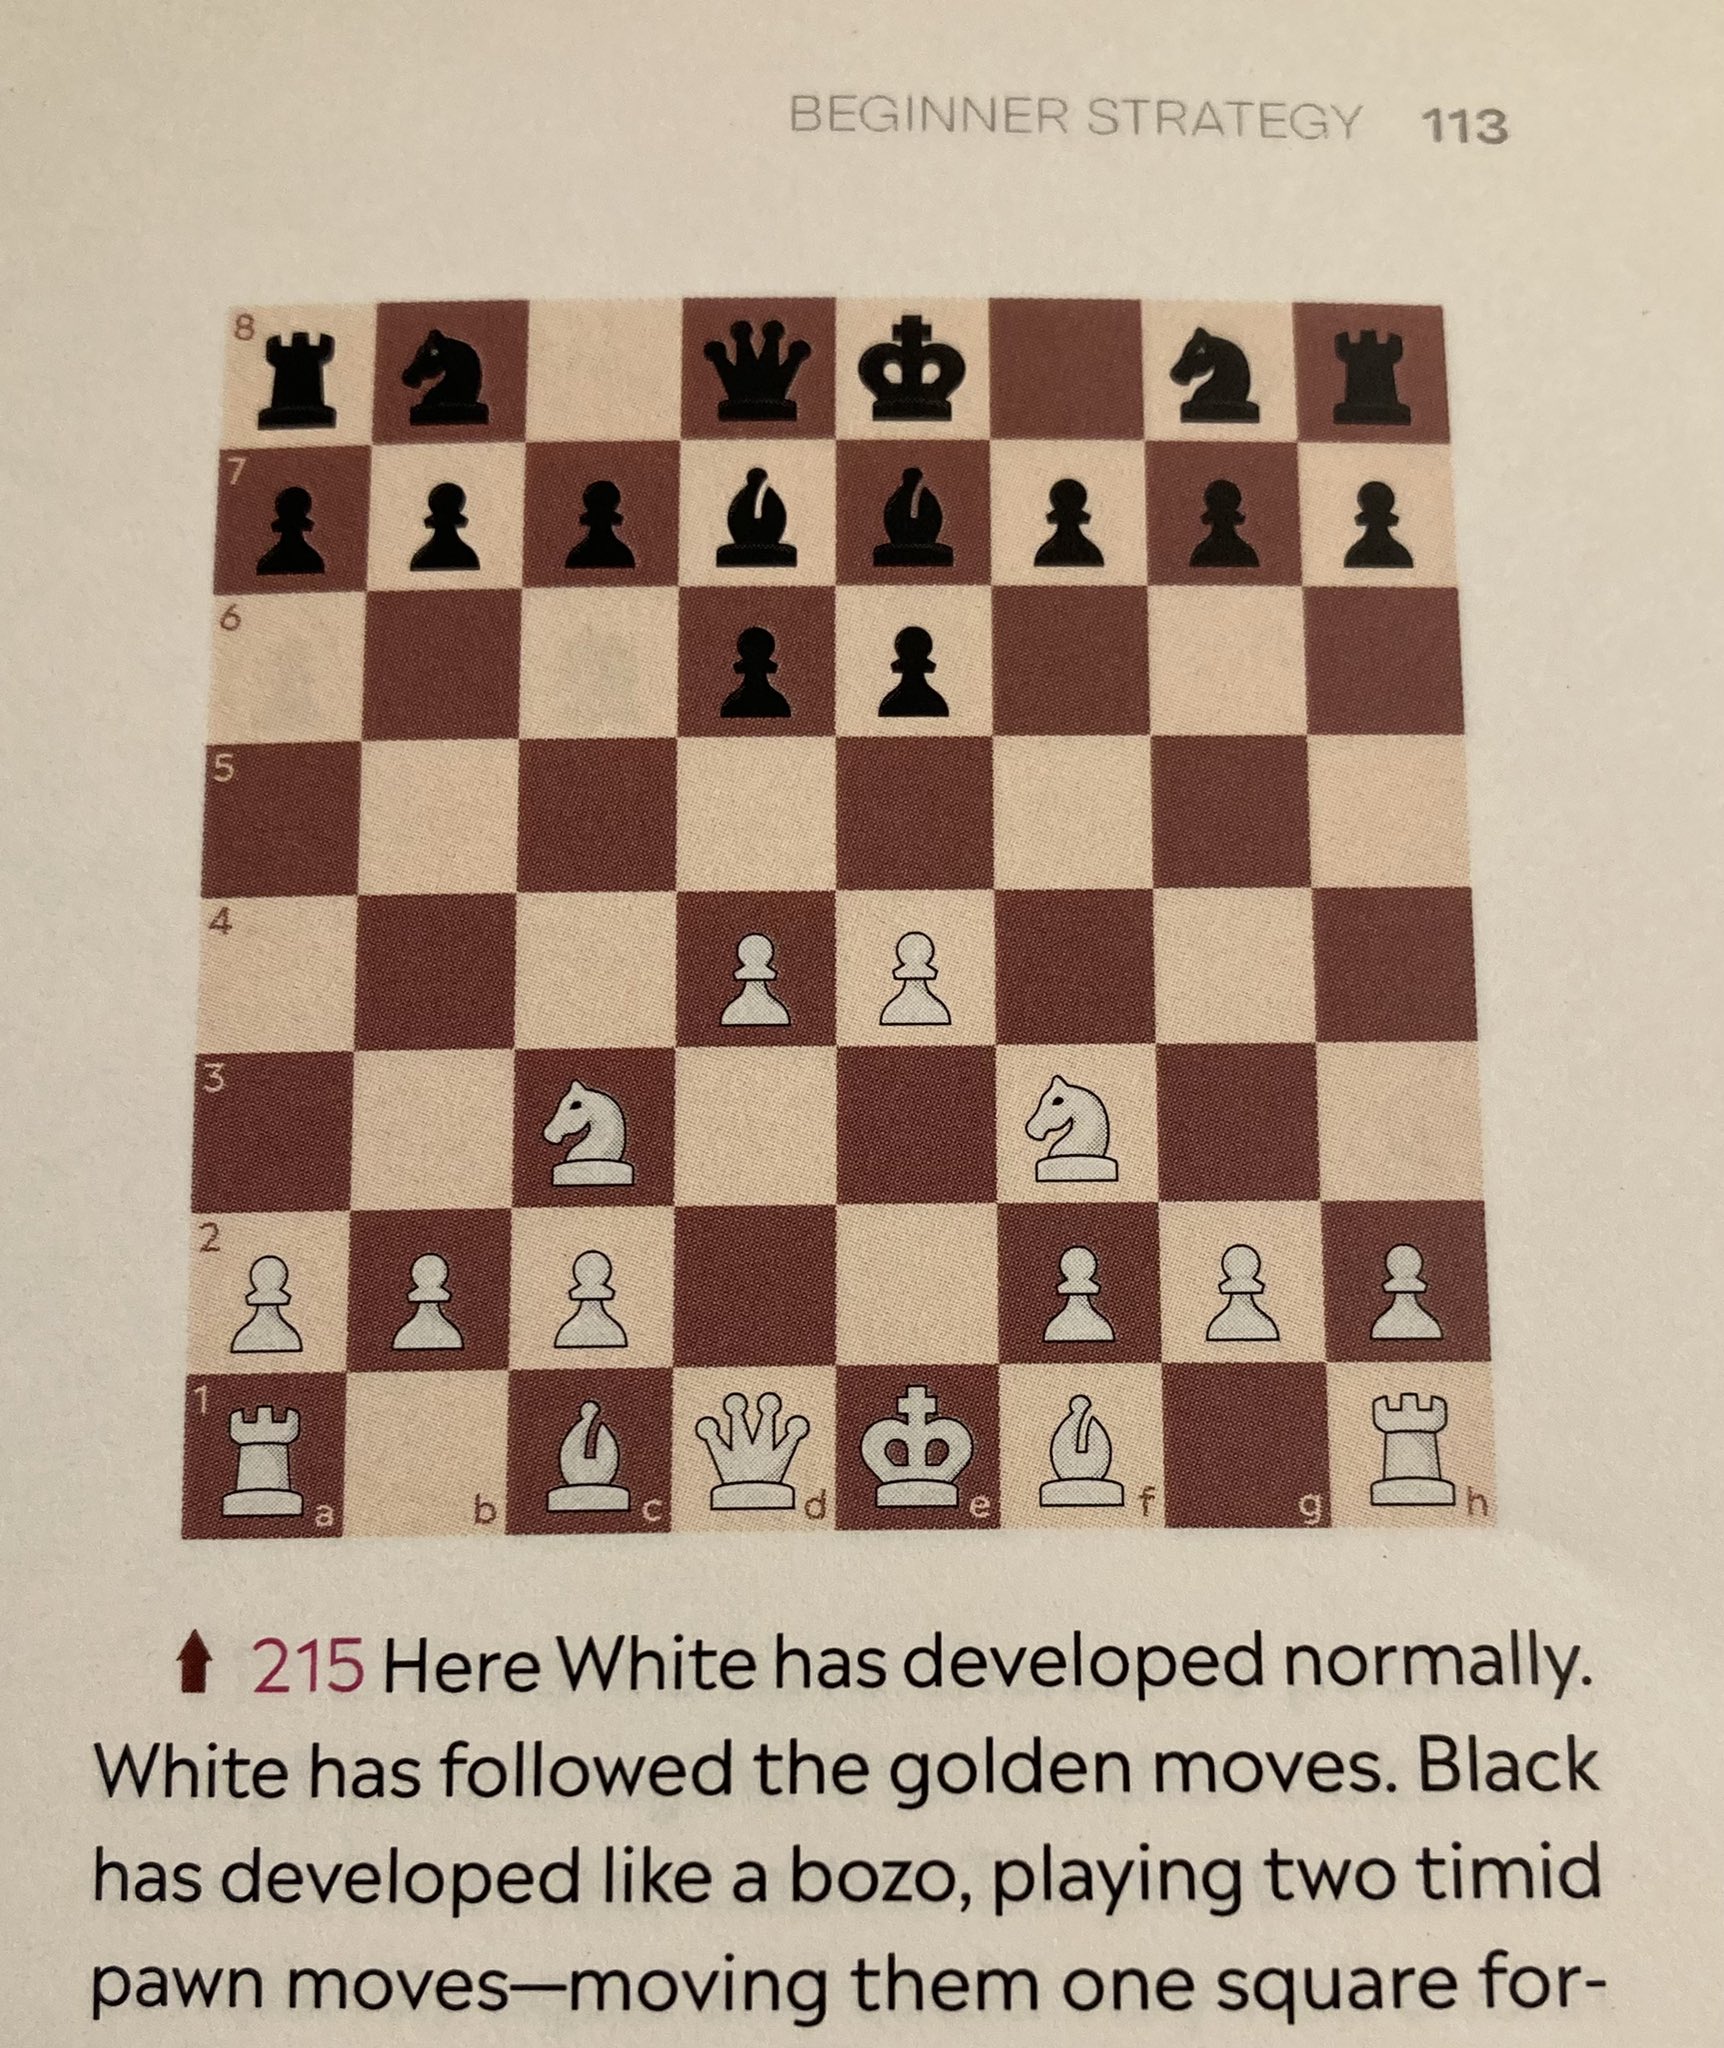 GothamChess' Releases New Book, Immediately Tops Three